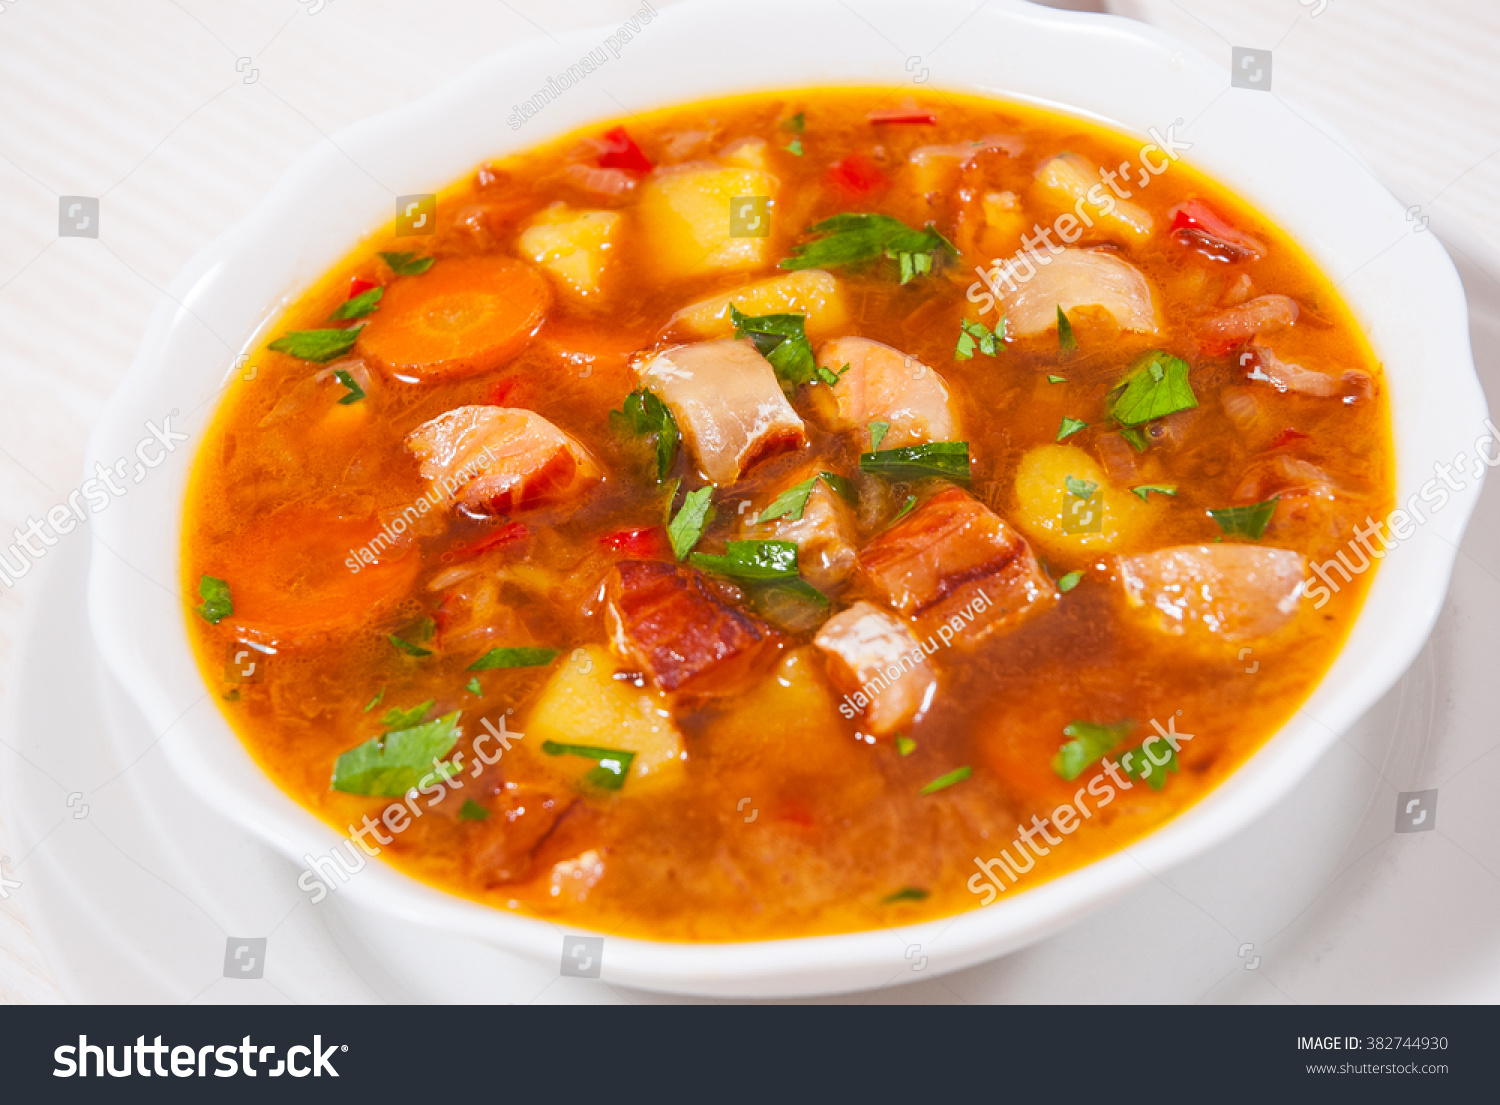 Fish soup with vegetables #382744930